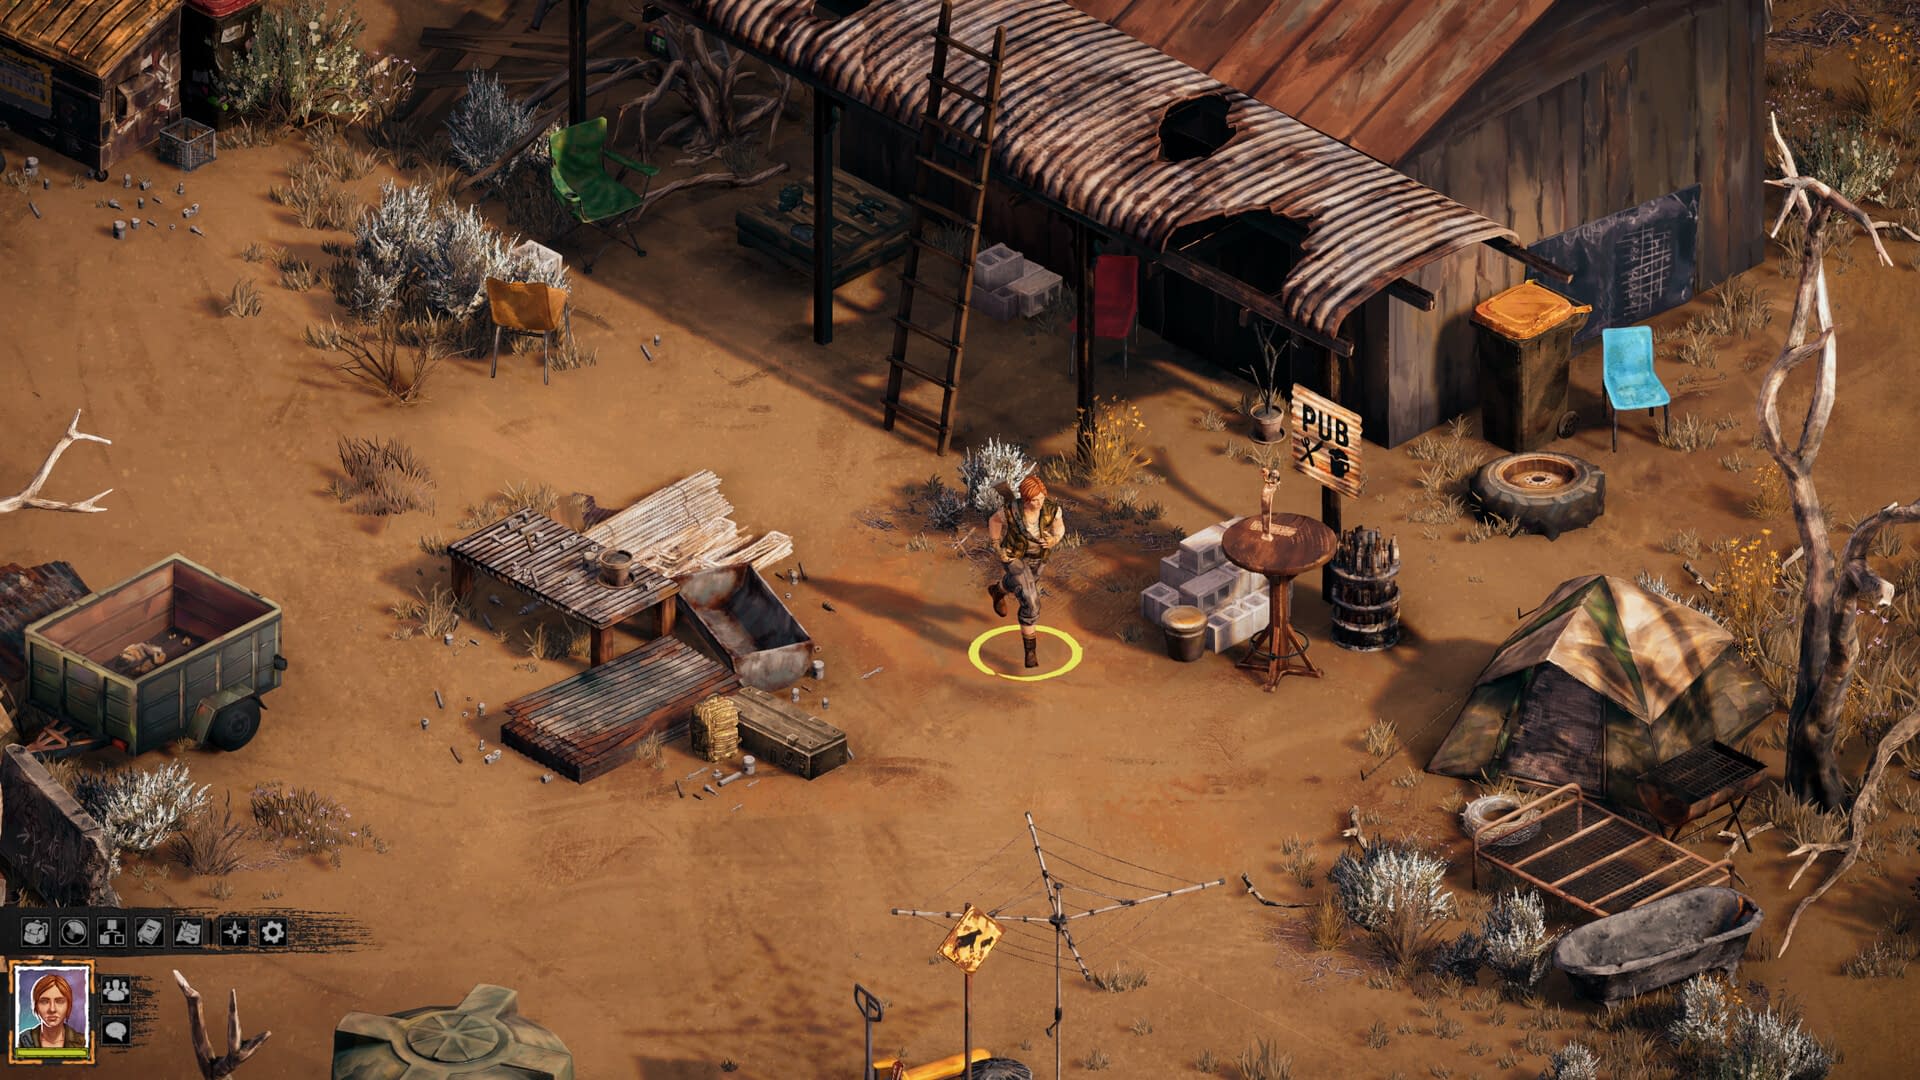 Isometric Survival Game Broken Roads Offers Attractive Environments